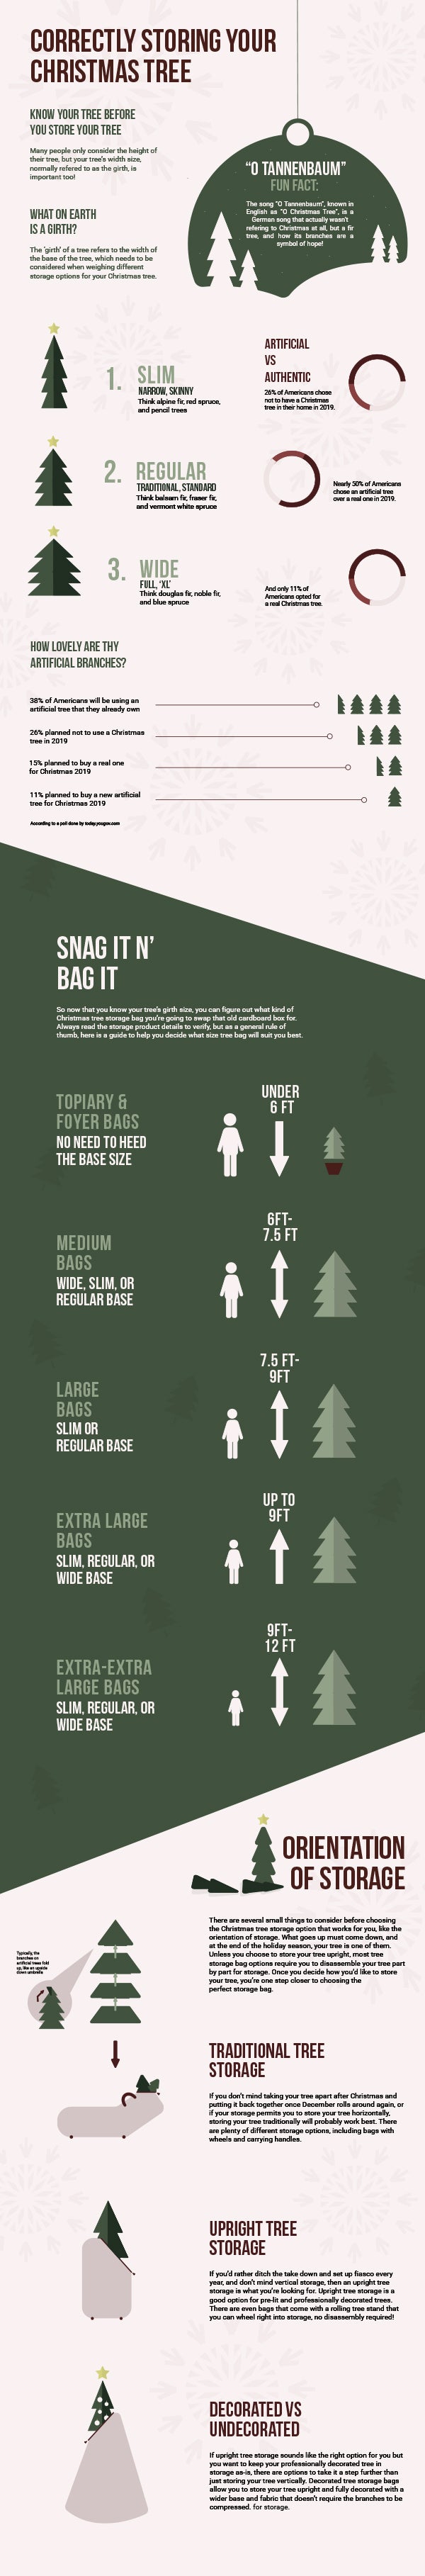 Infographic: Correctly Storing Your Christmas Tree